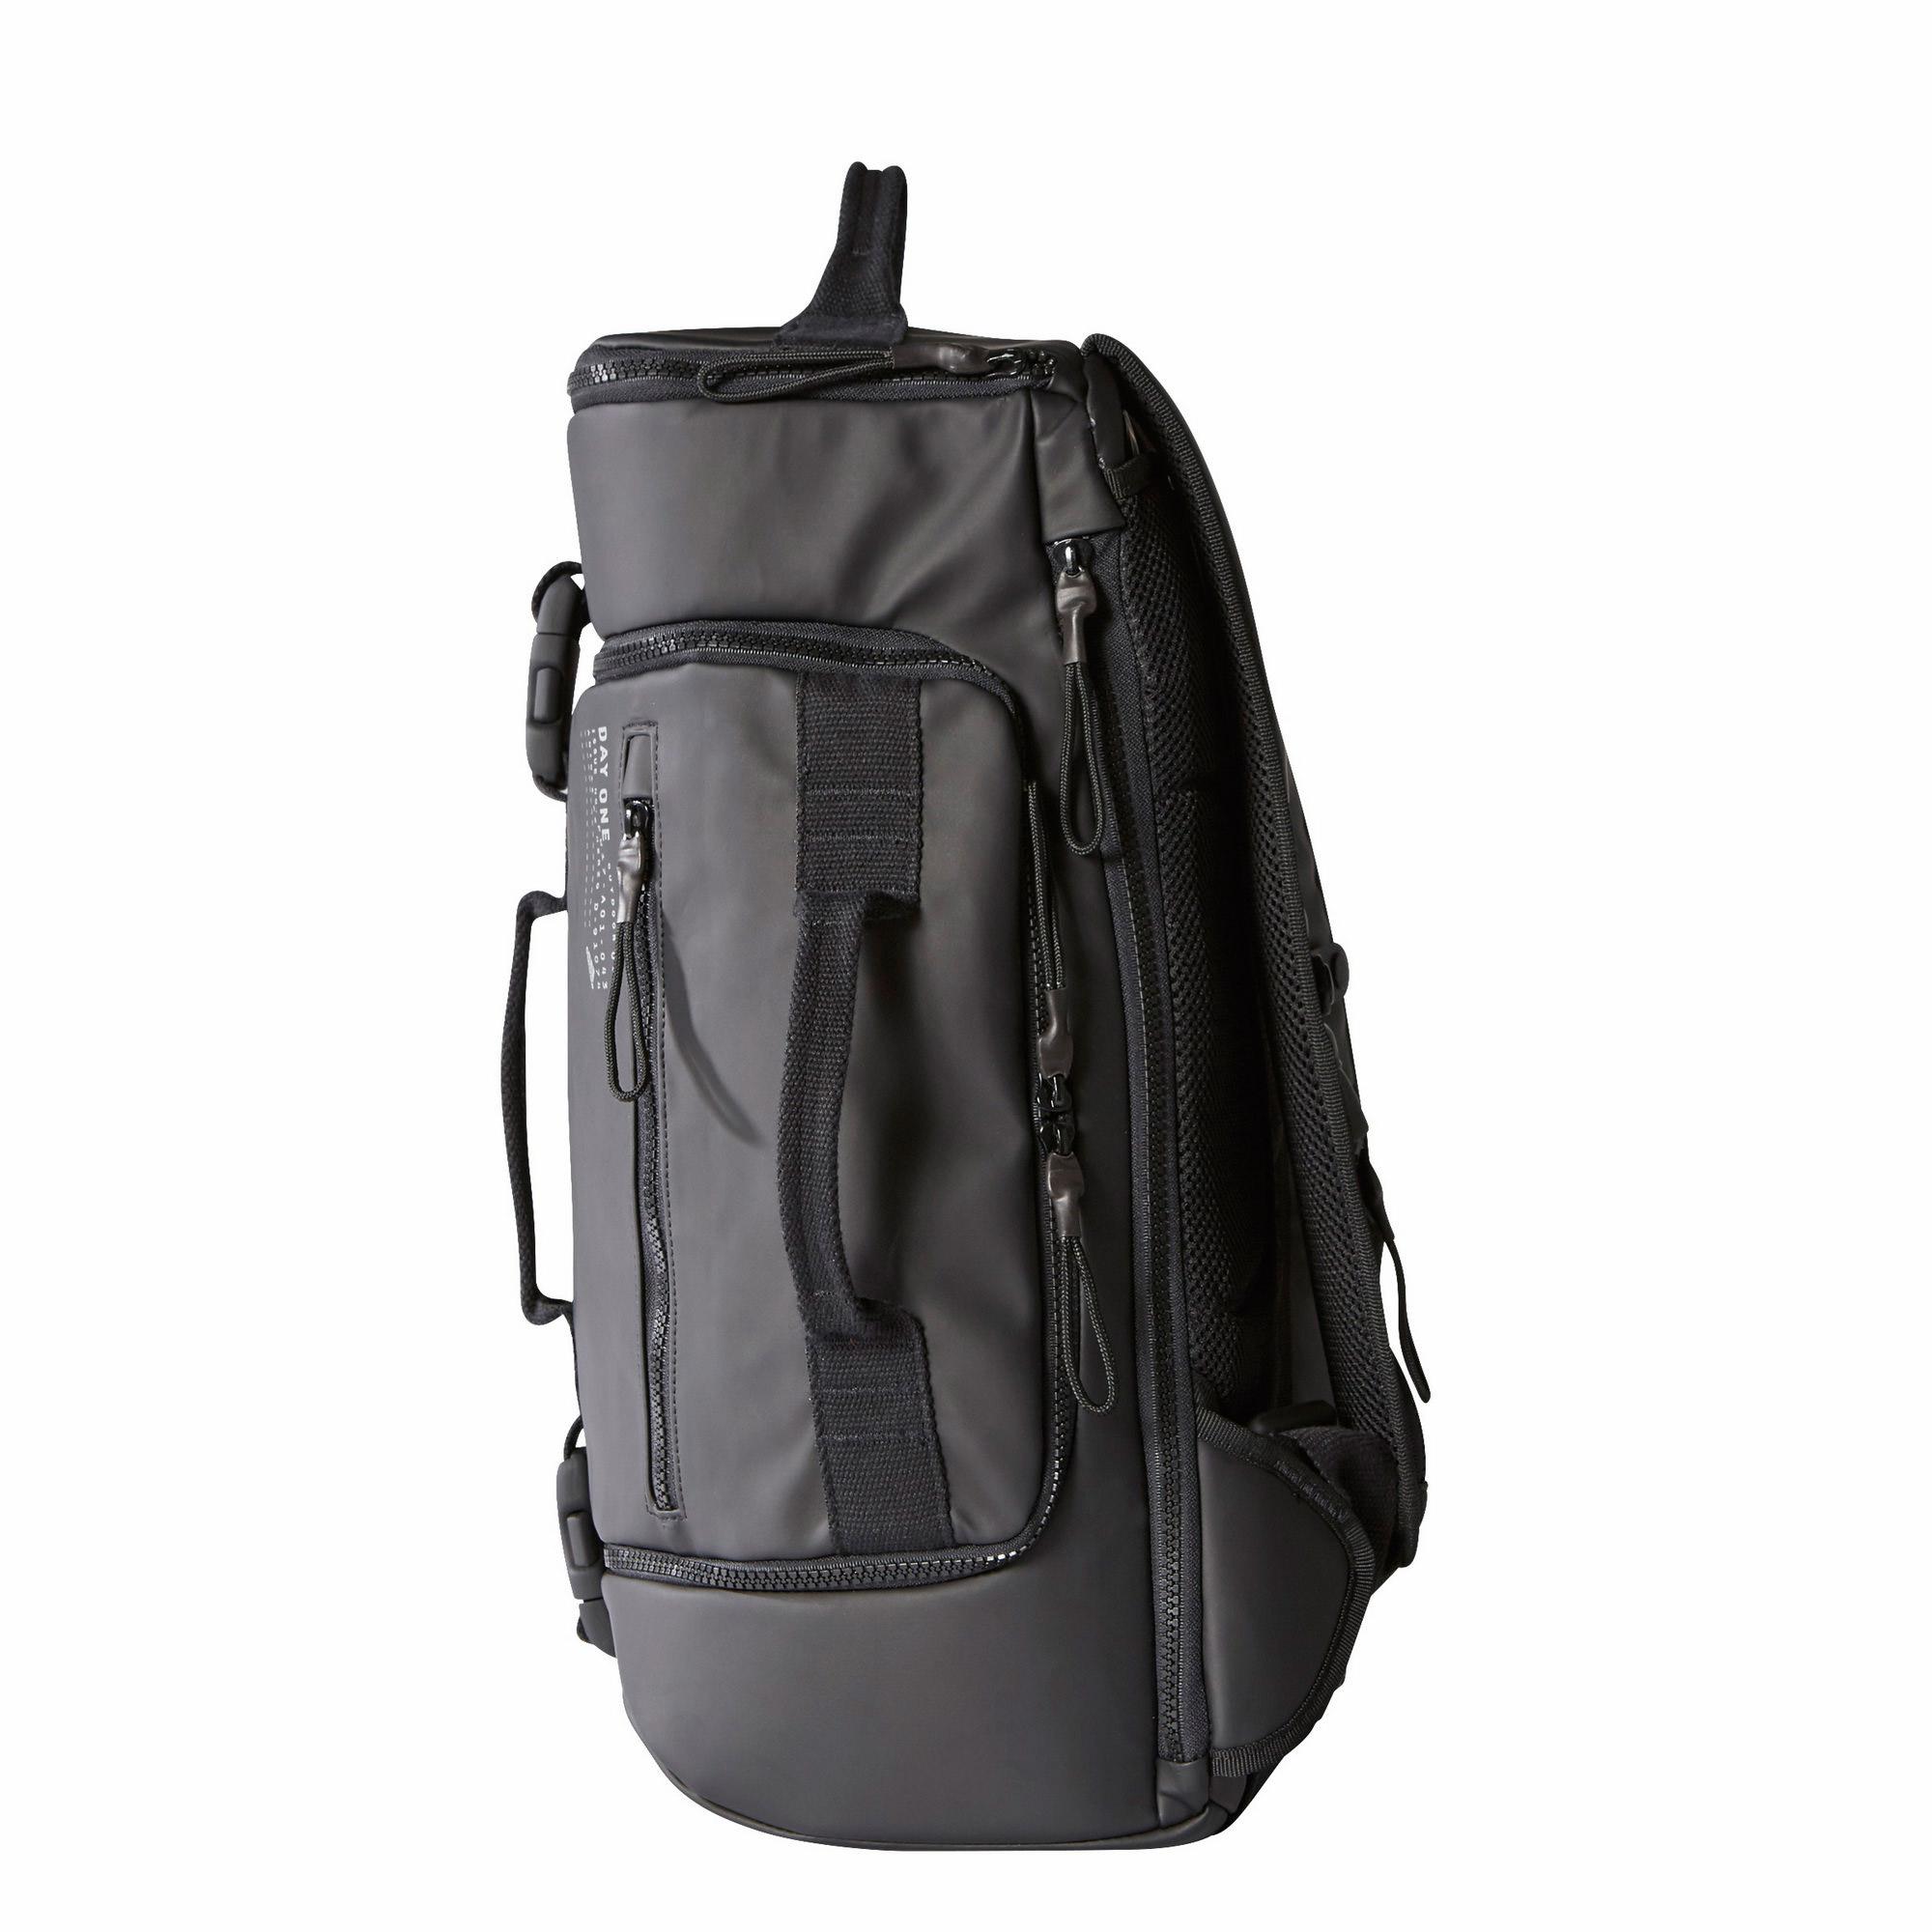 adidas day one backpack